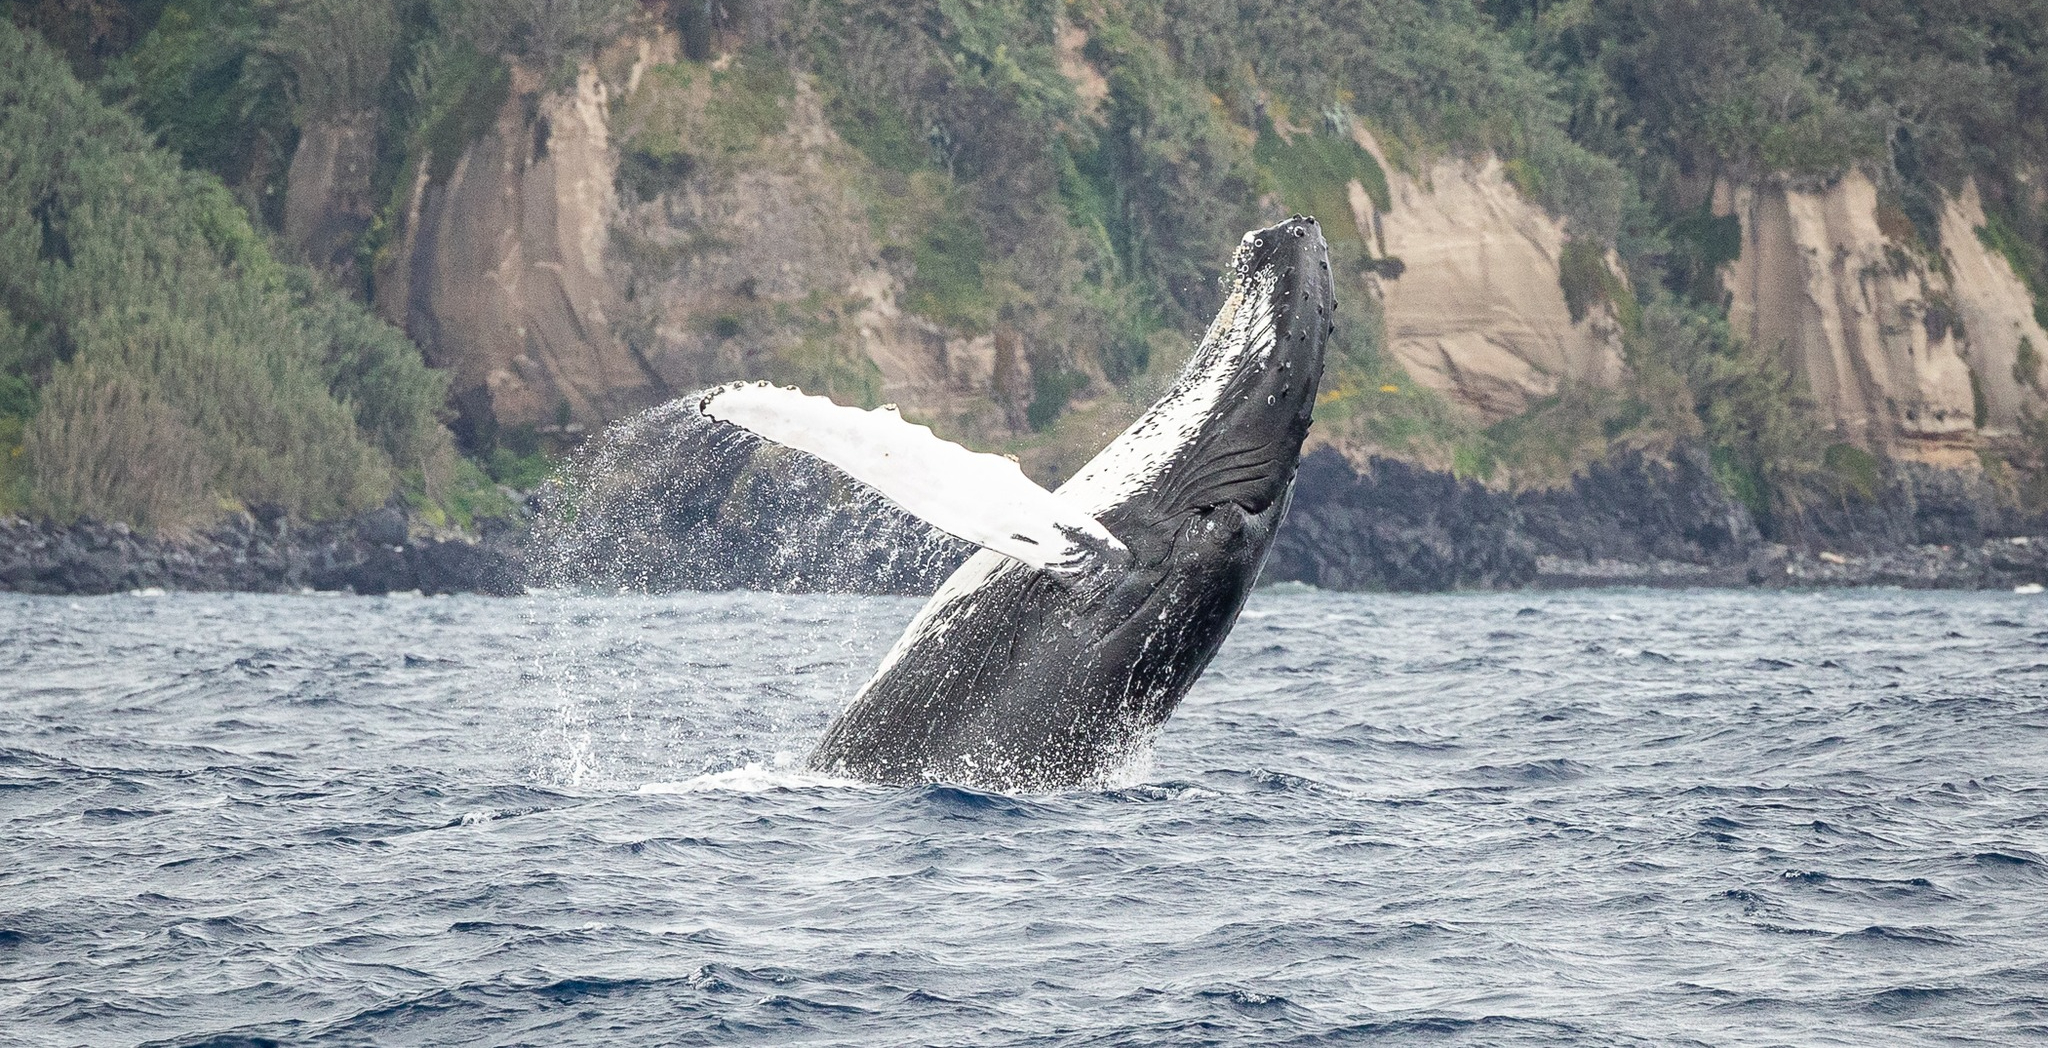 Azores Whaling History Tour